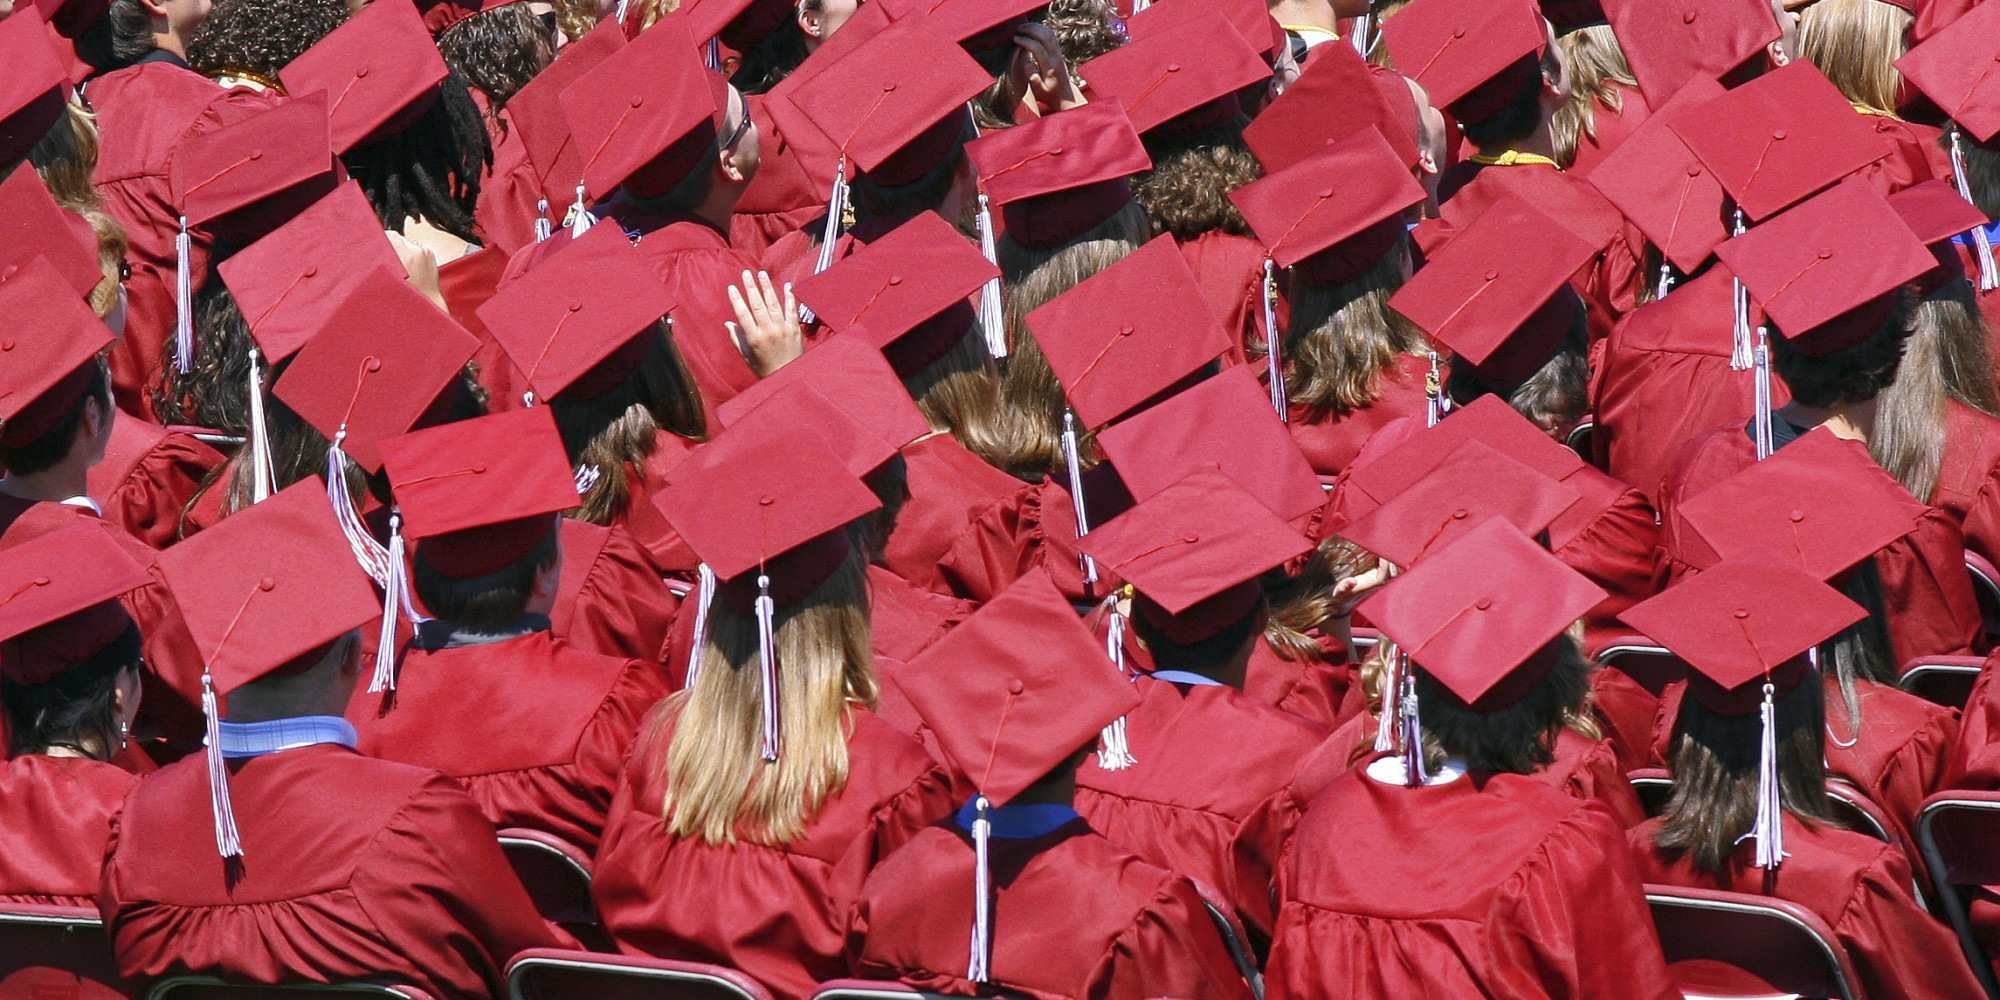 Poverty The Strongest Factor In Whether High School Graduates Go To College | HuffPost2000 x 1000